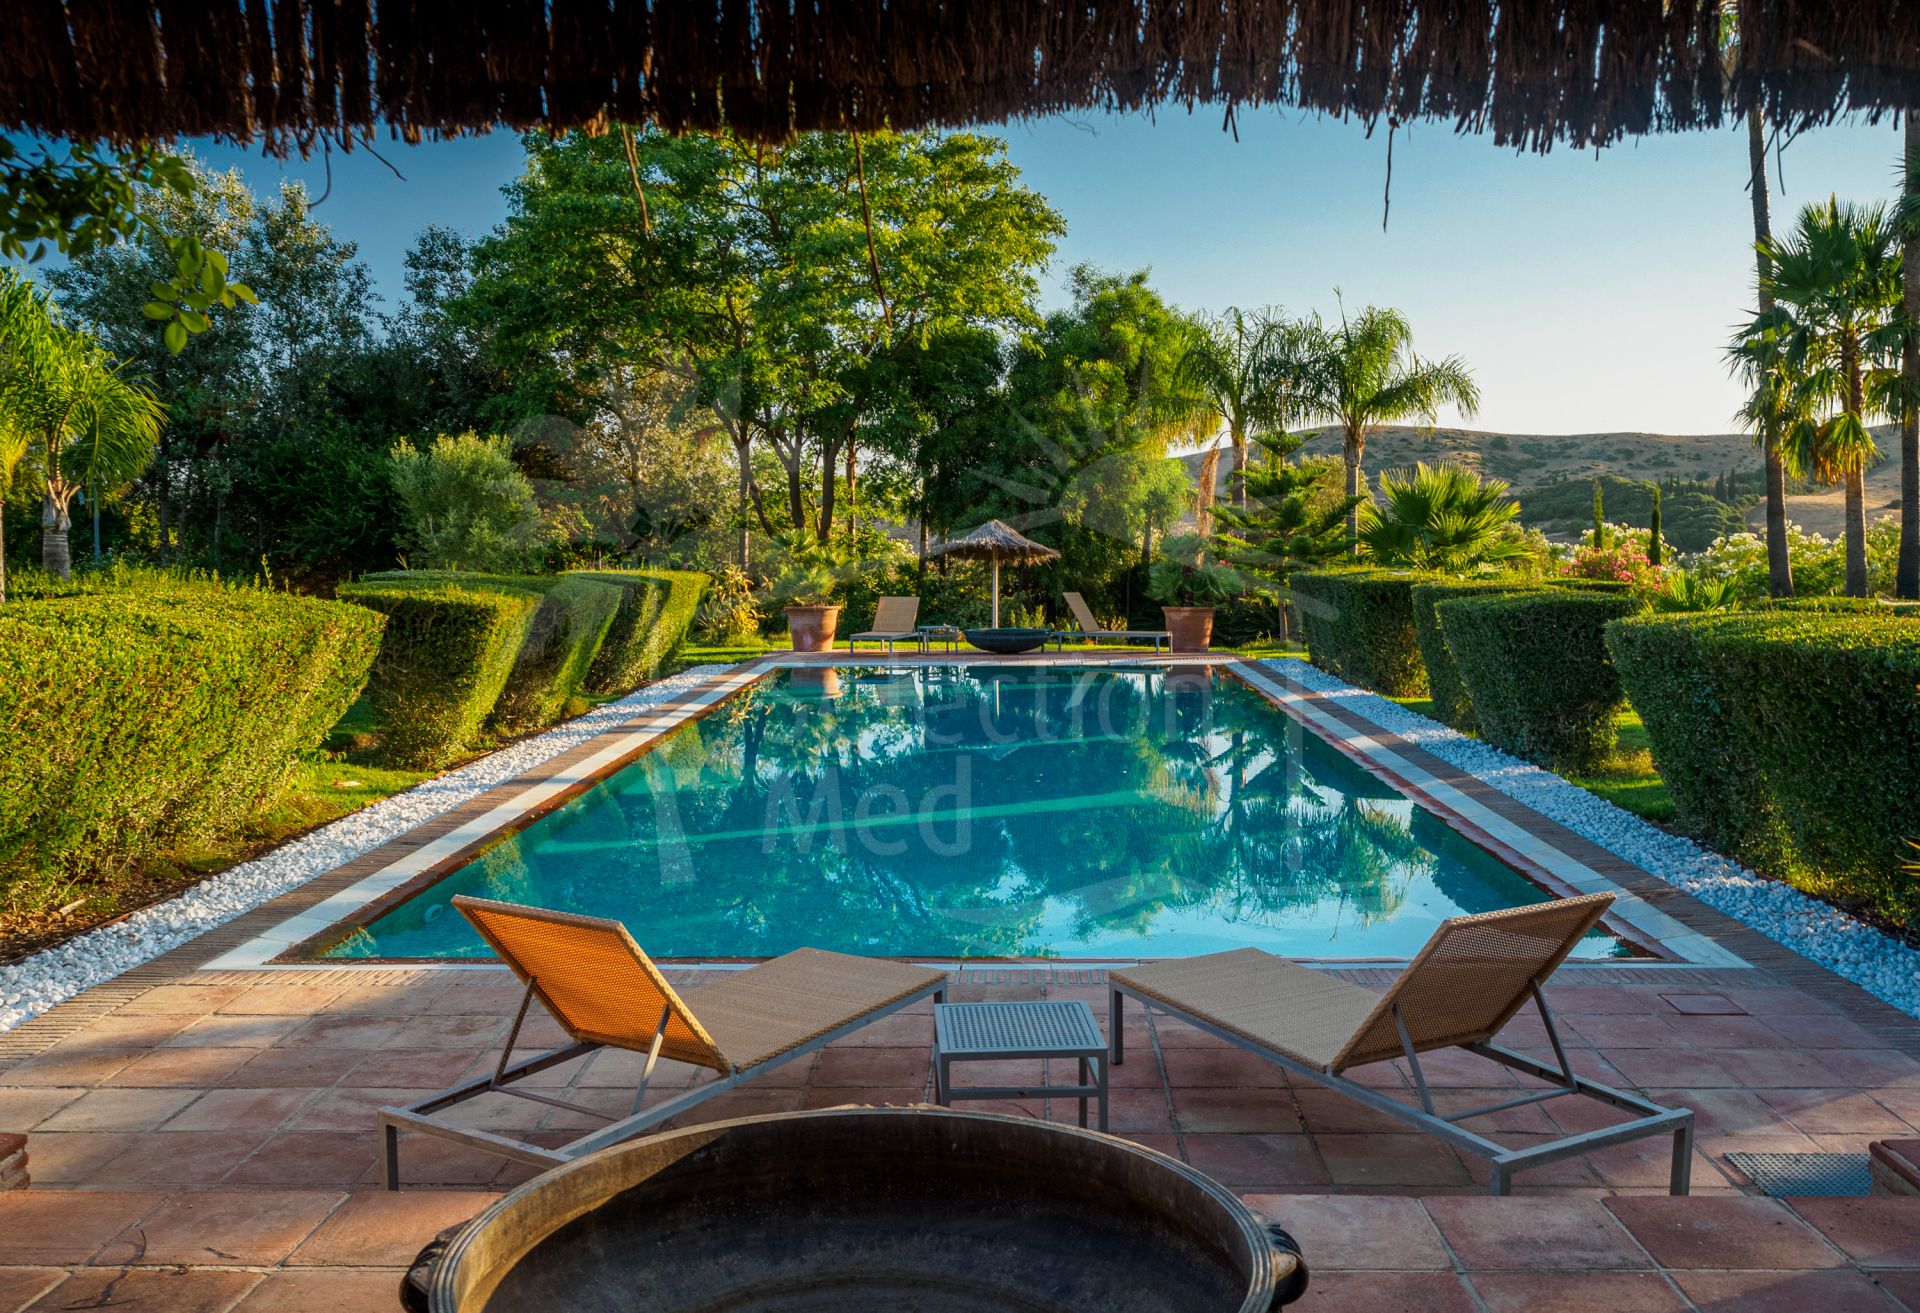 Unique Equestrian Country Estate Situated on an Elevated Plot of 19000m2 with a Beautiful Finca and Guest Accommodation, Only a Short Drive From Sotogrande.